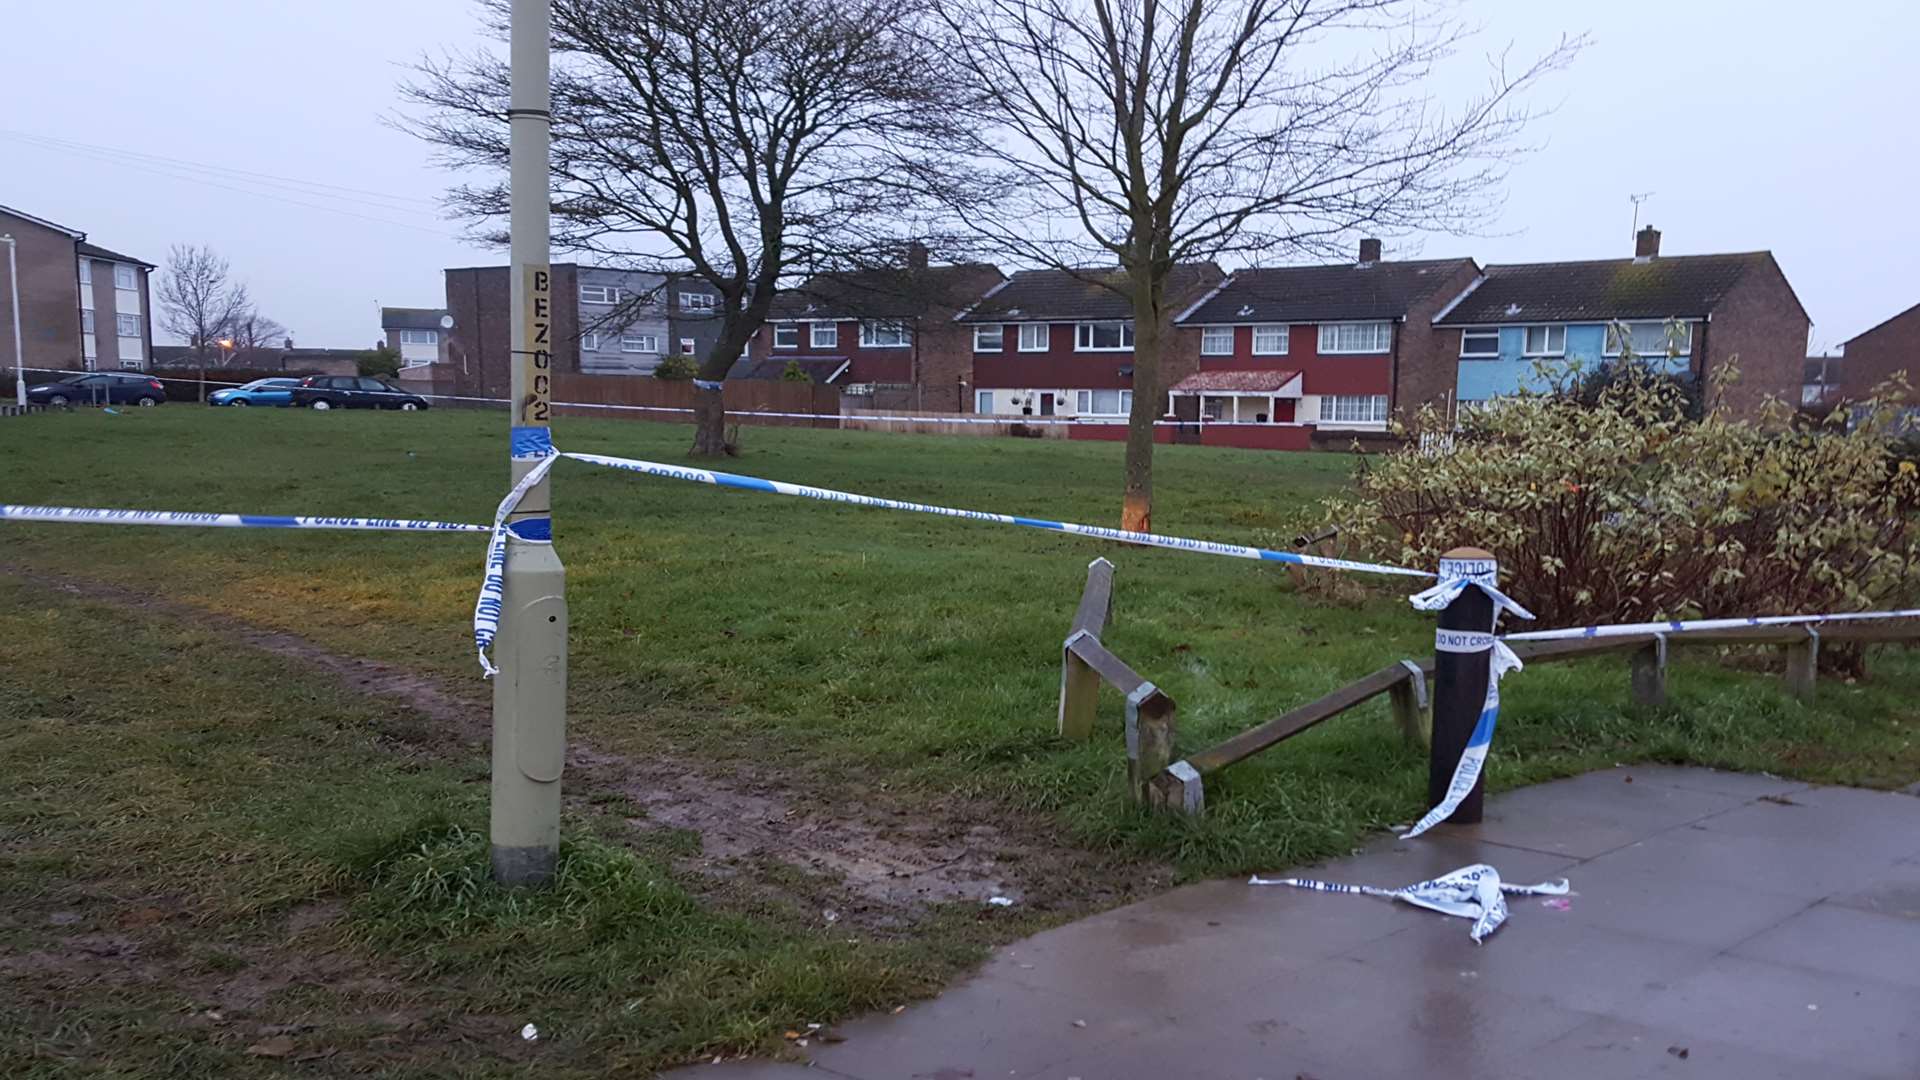 The area remained taped off until midday